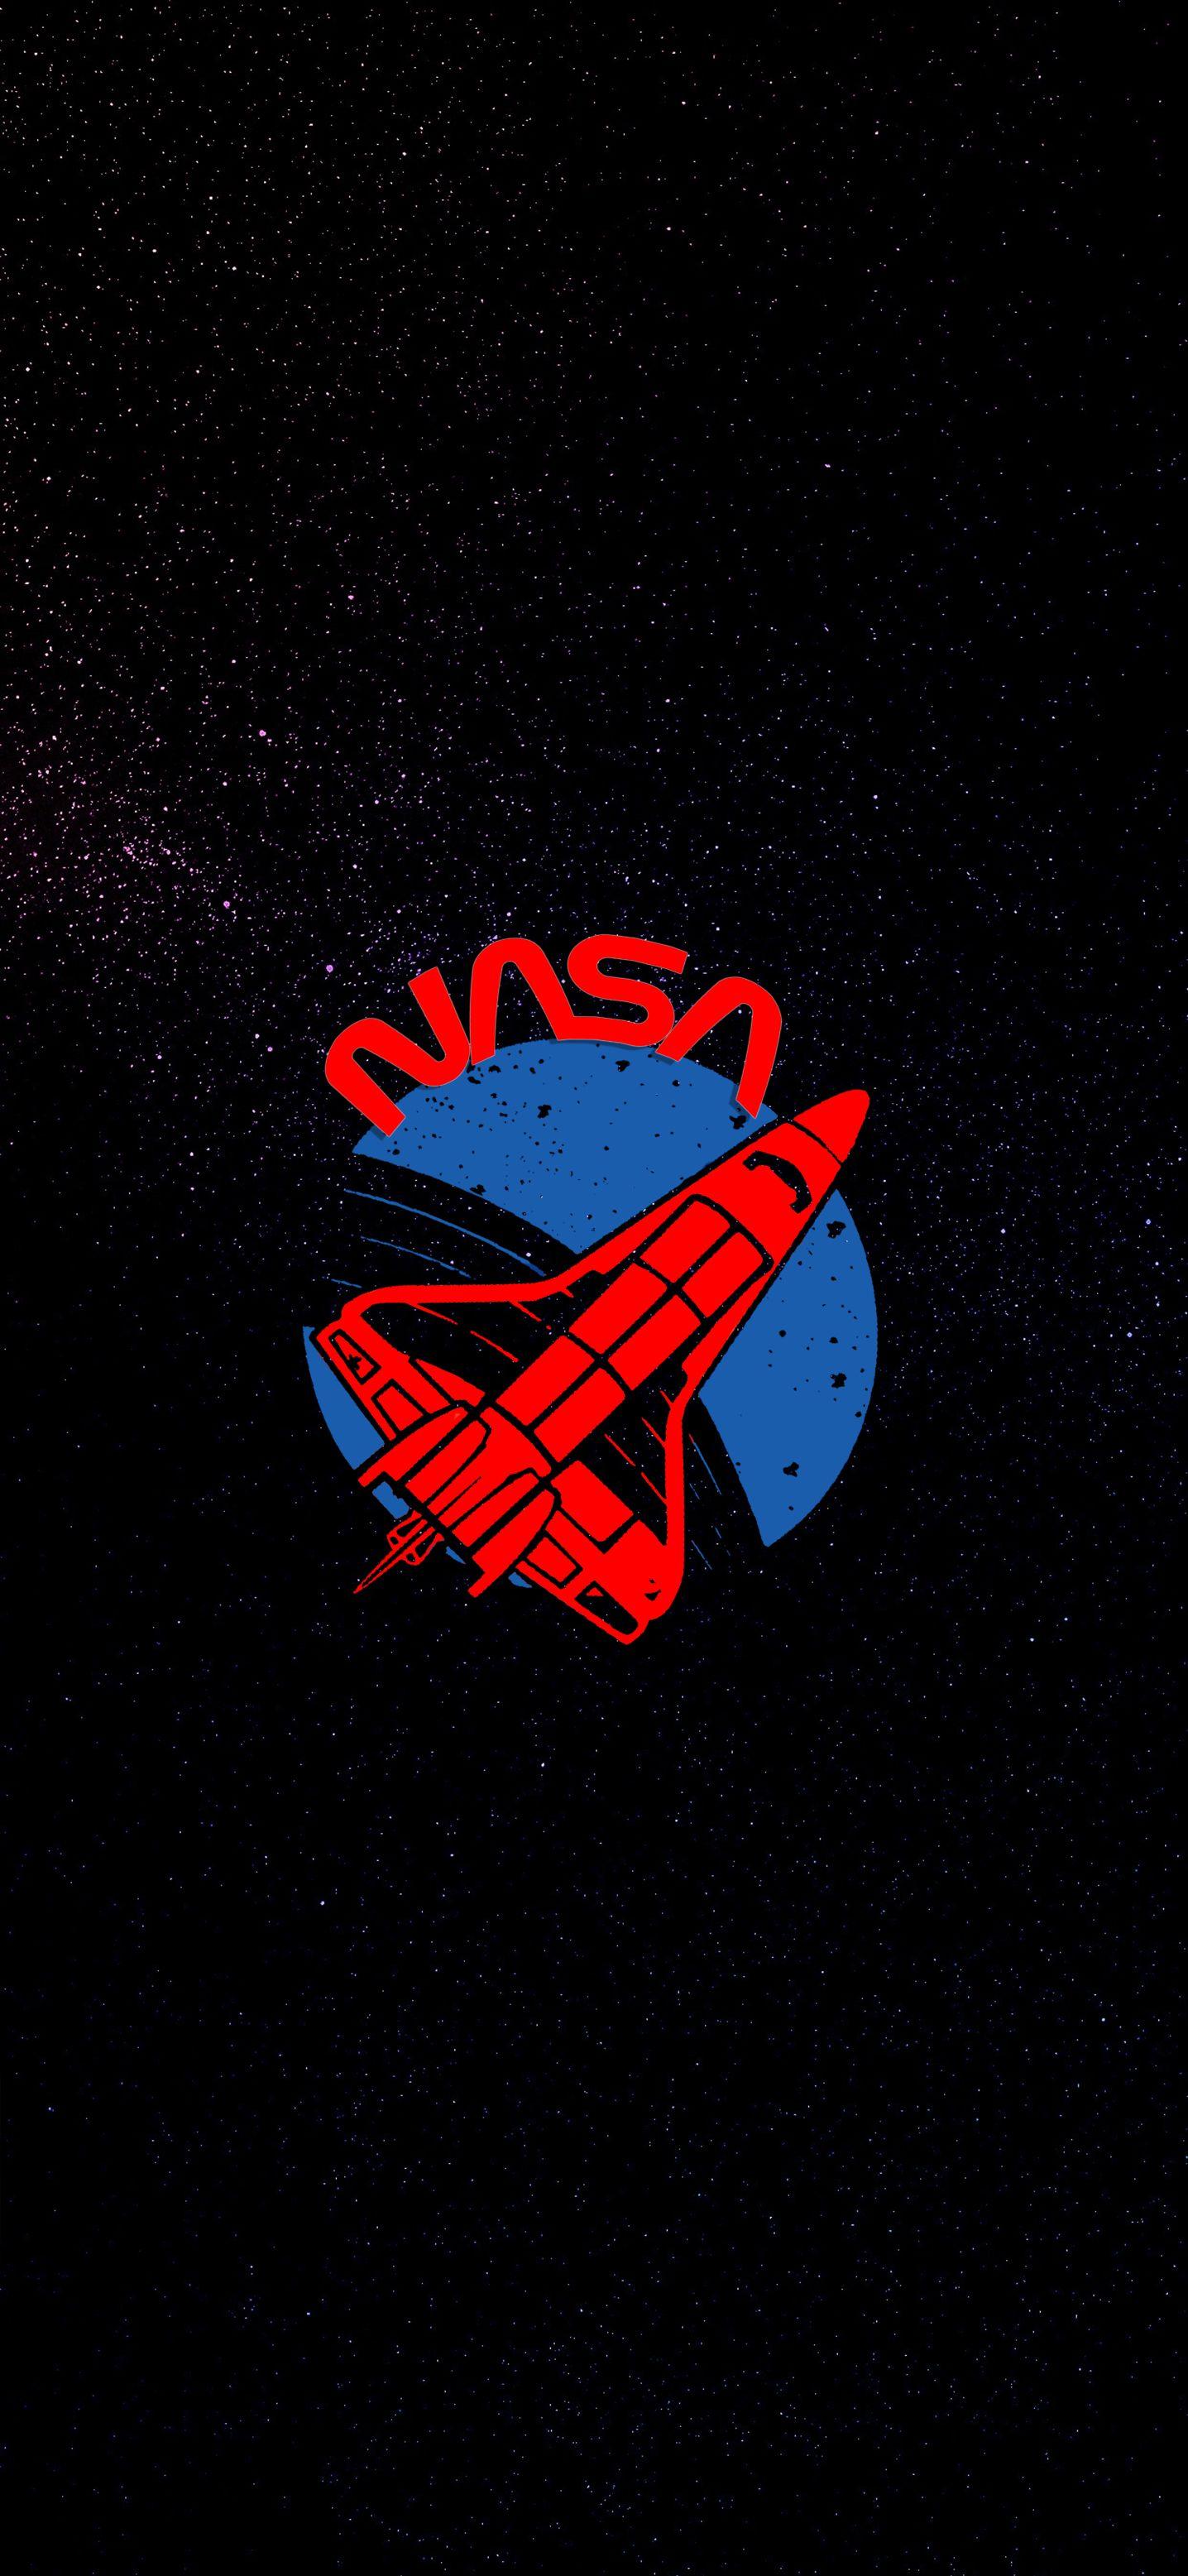 largest nasa picture iphone background